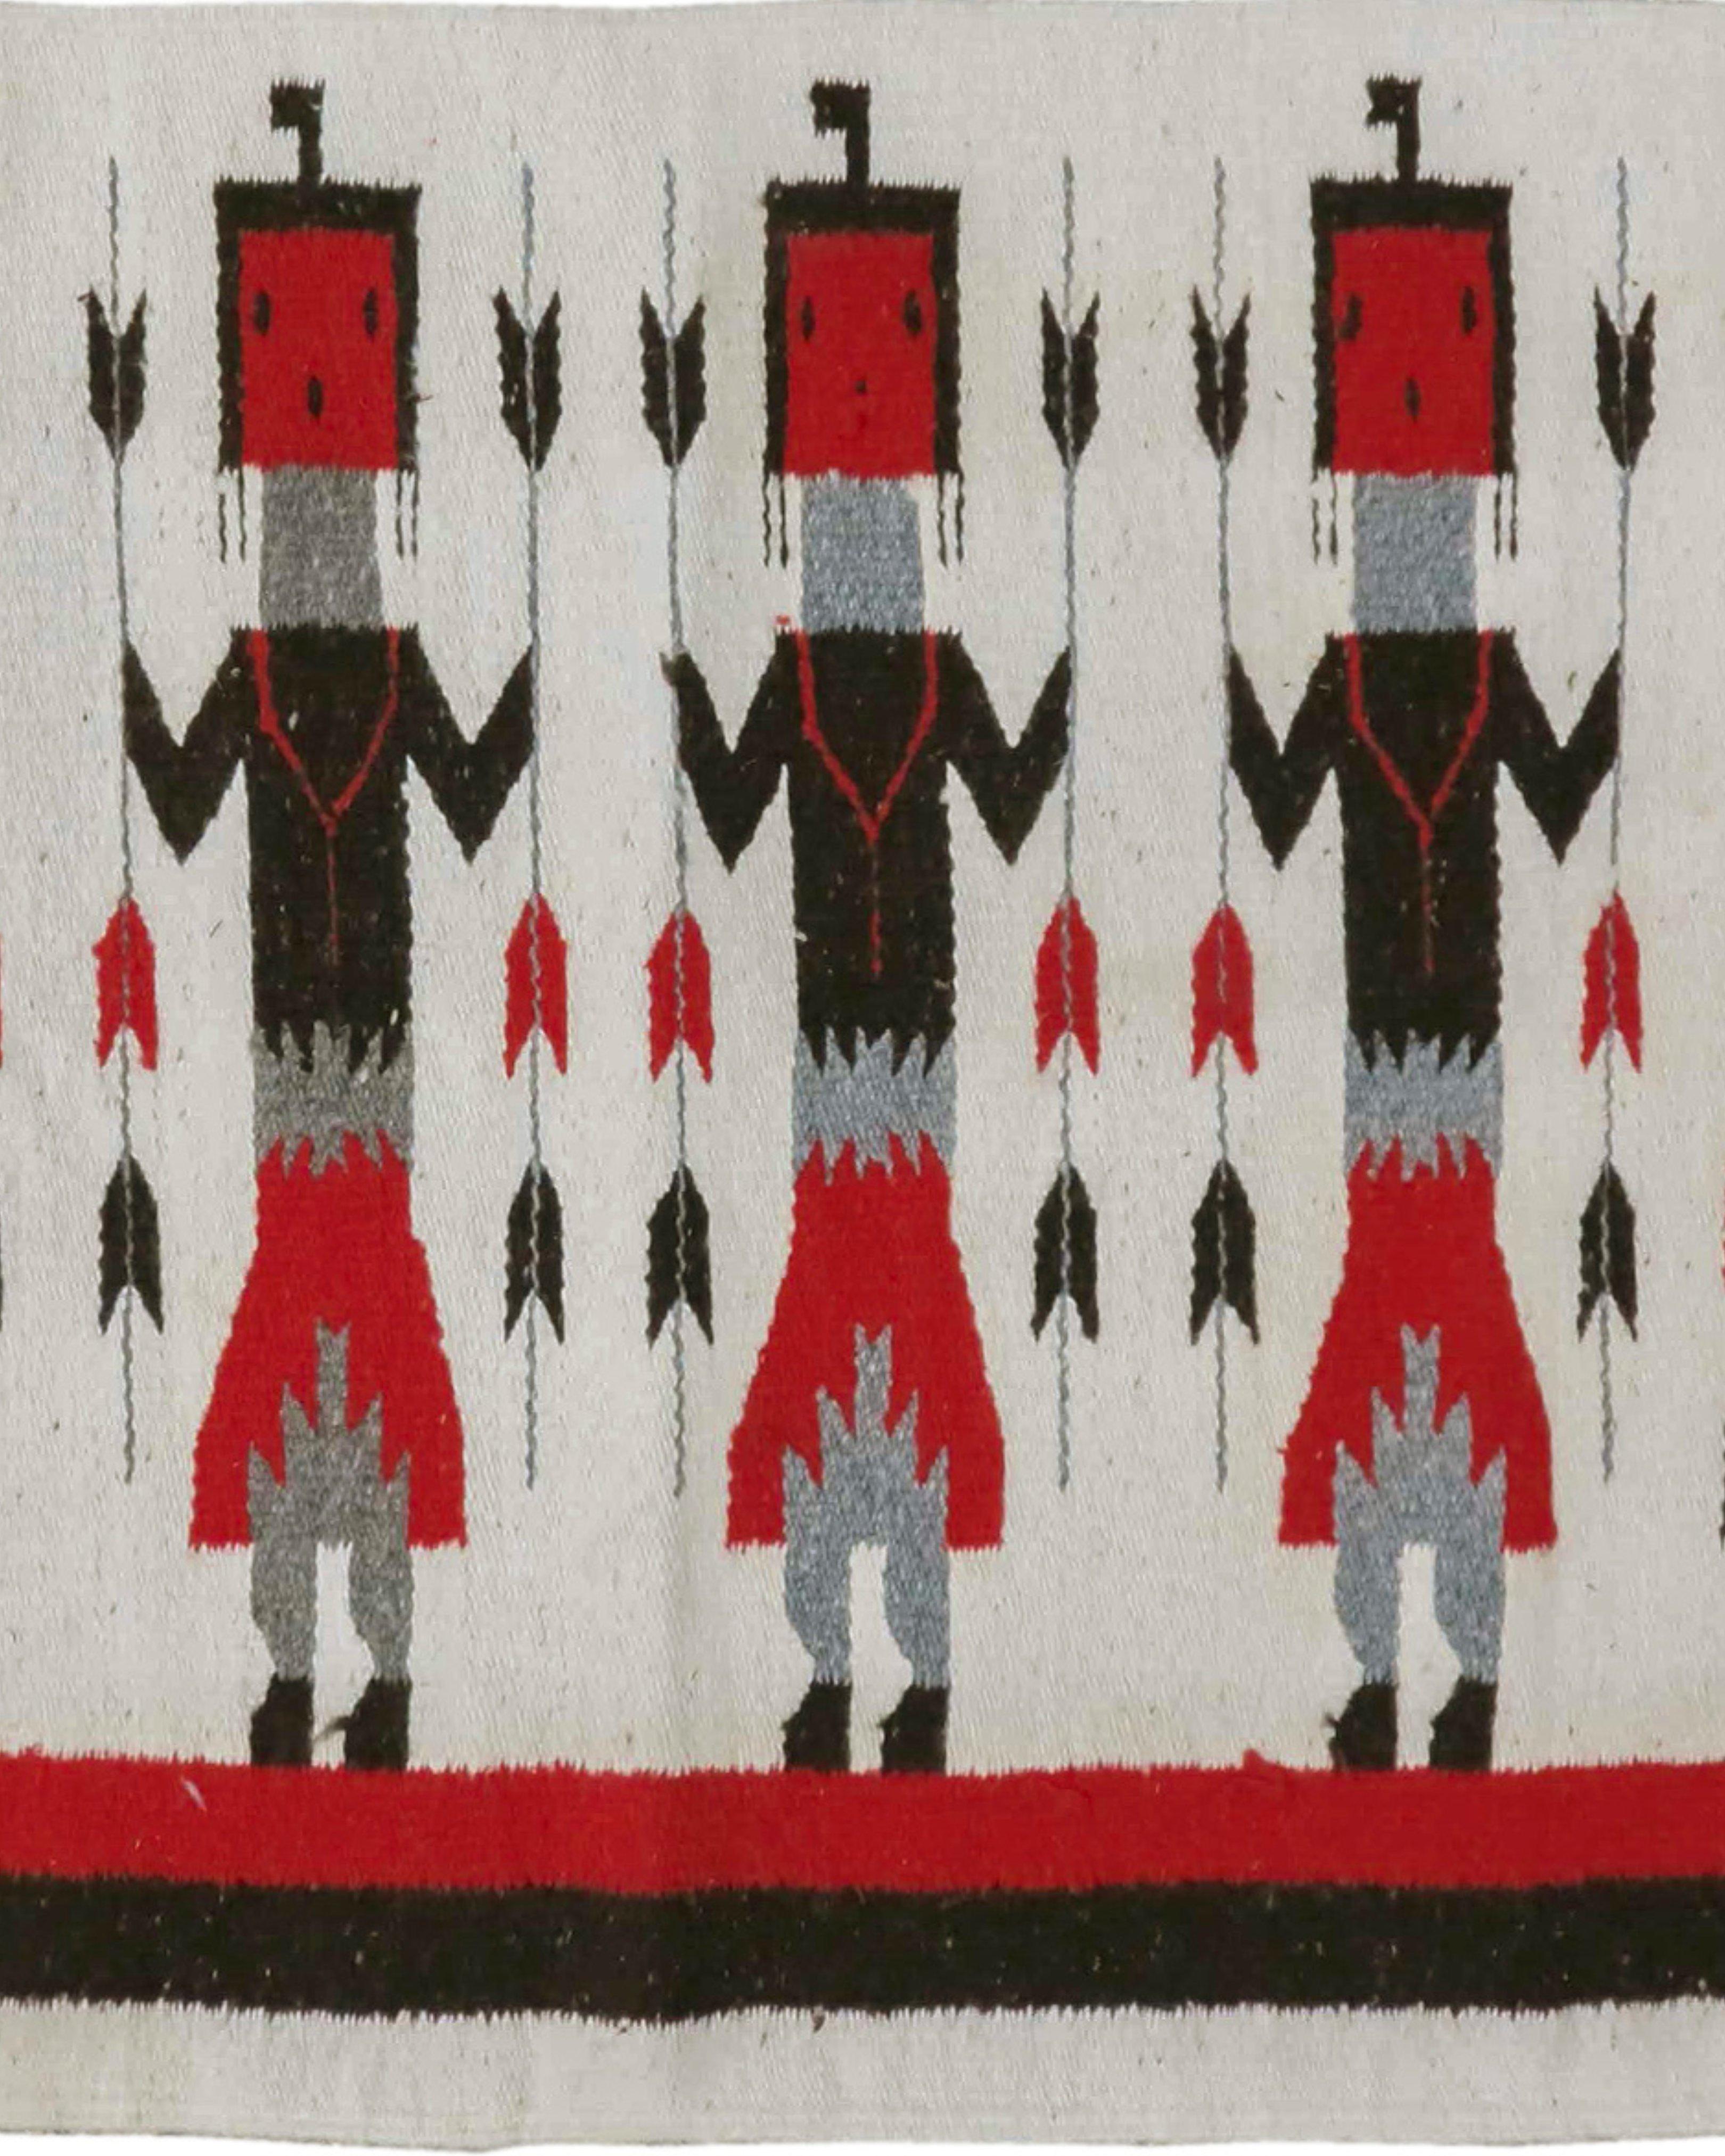 Yei Navajo Rug, Early 20th Century 

In Navajo mythology, the Yei are a group of deities who act as mediators between humans and the Great Spirit. The Yei are also known as the Diyin Diné'e or Holy People, and are associated with the forces of